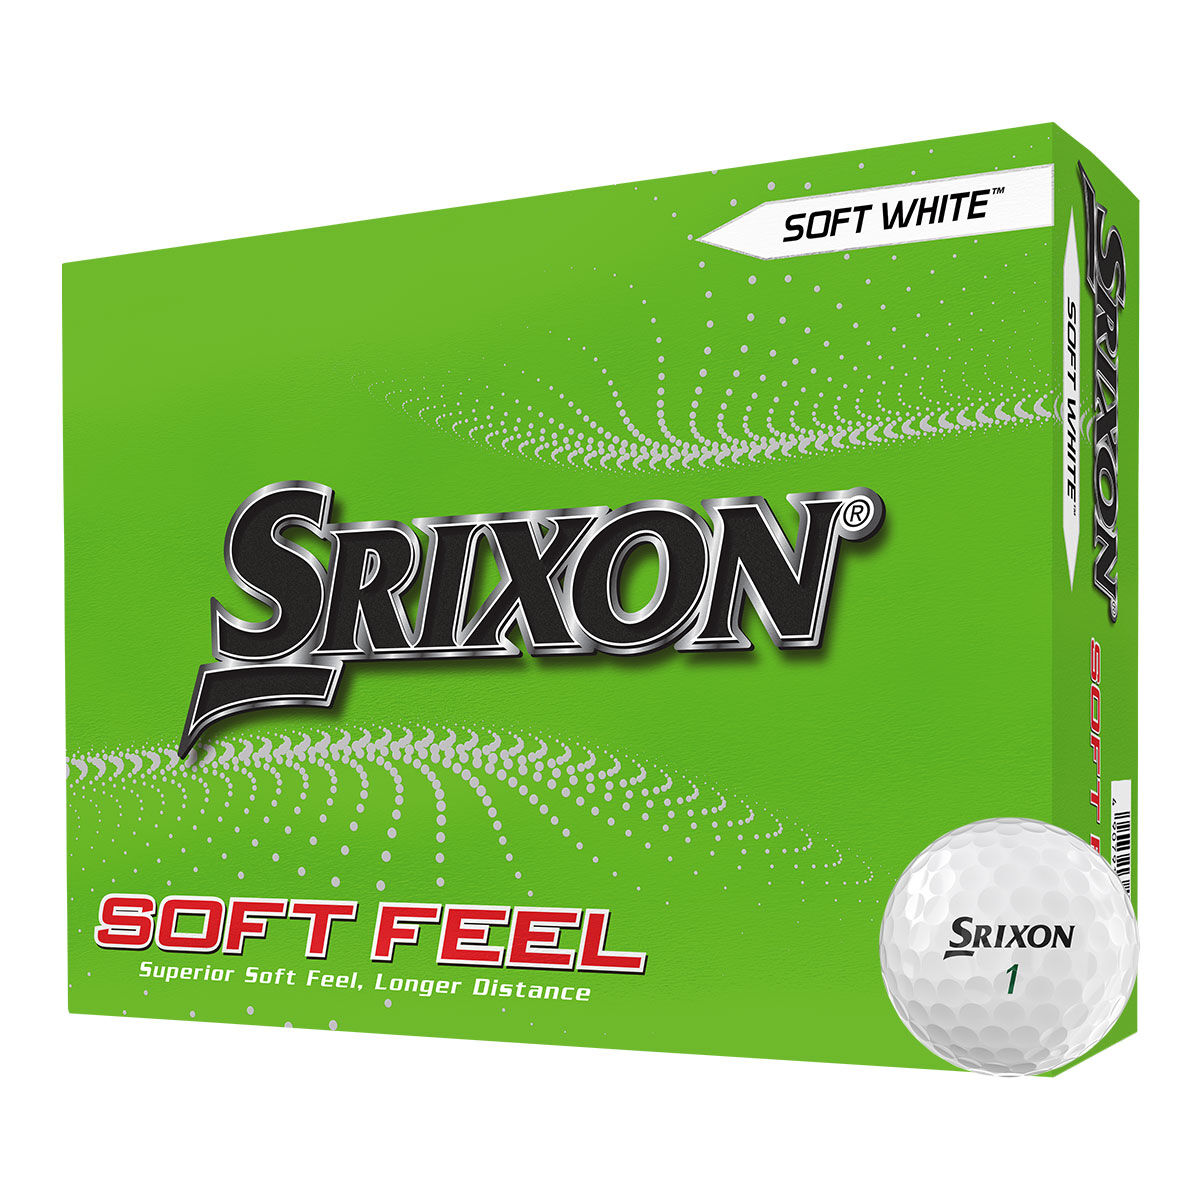 Srixon Golf Ball, White Comfortable Soft Feel 12 Pack | American Golf, One Size - Father's Day Gift von Srixon